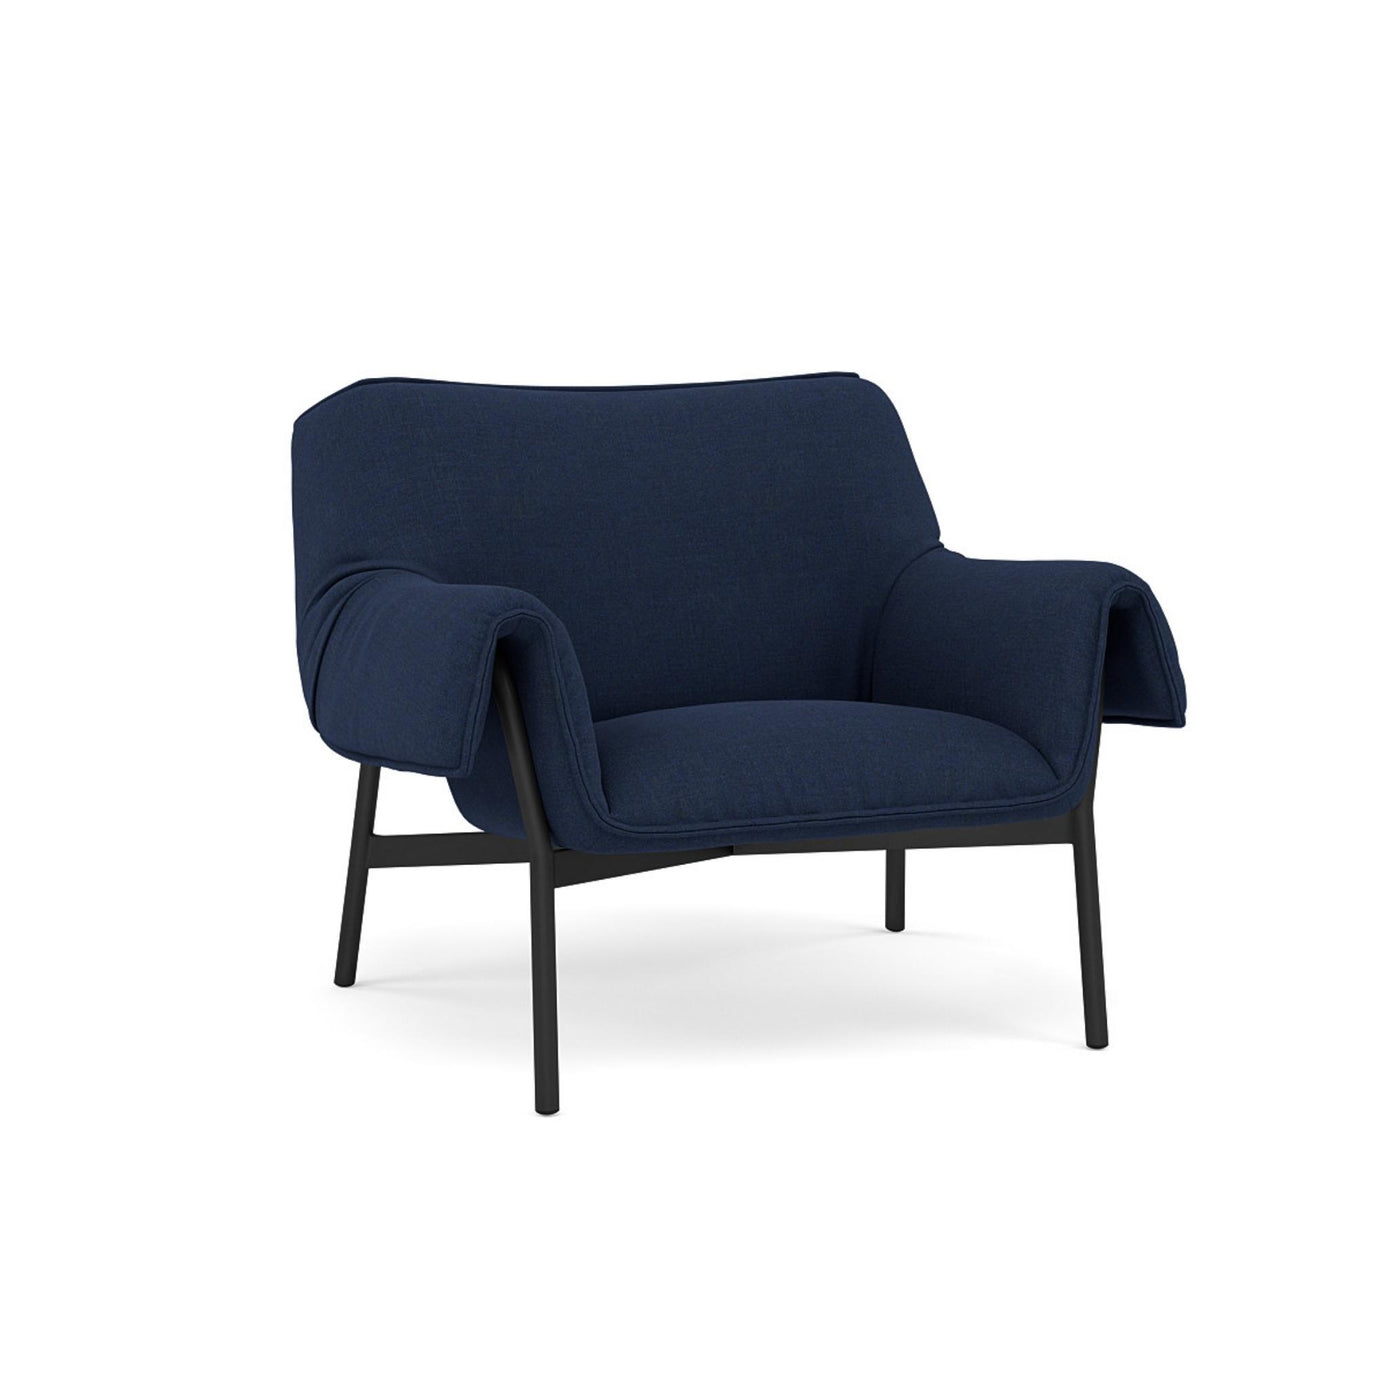 Muuto Wrap Lounge Chair. Made to order from someday designs. #colour_remix-773